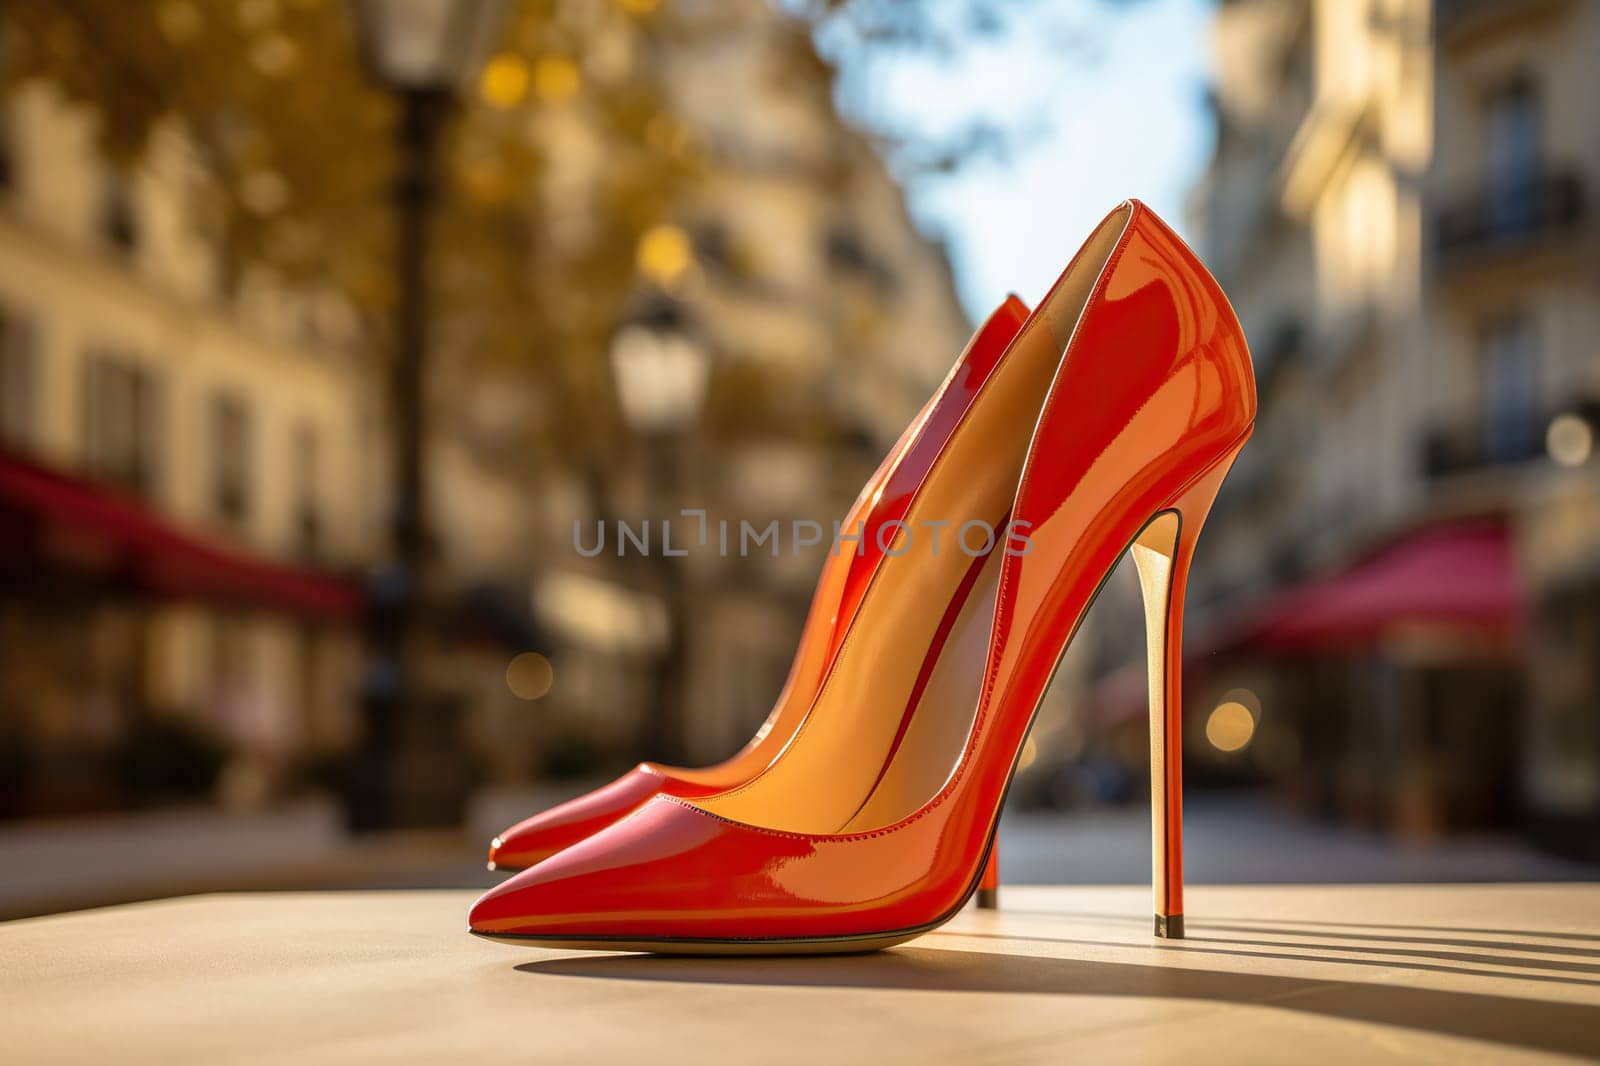 Elegant red women's high-heeled shoe against a city bokeh background. Generated by artificial intelligence by Vovmar